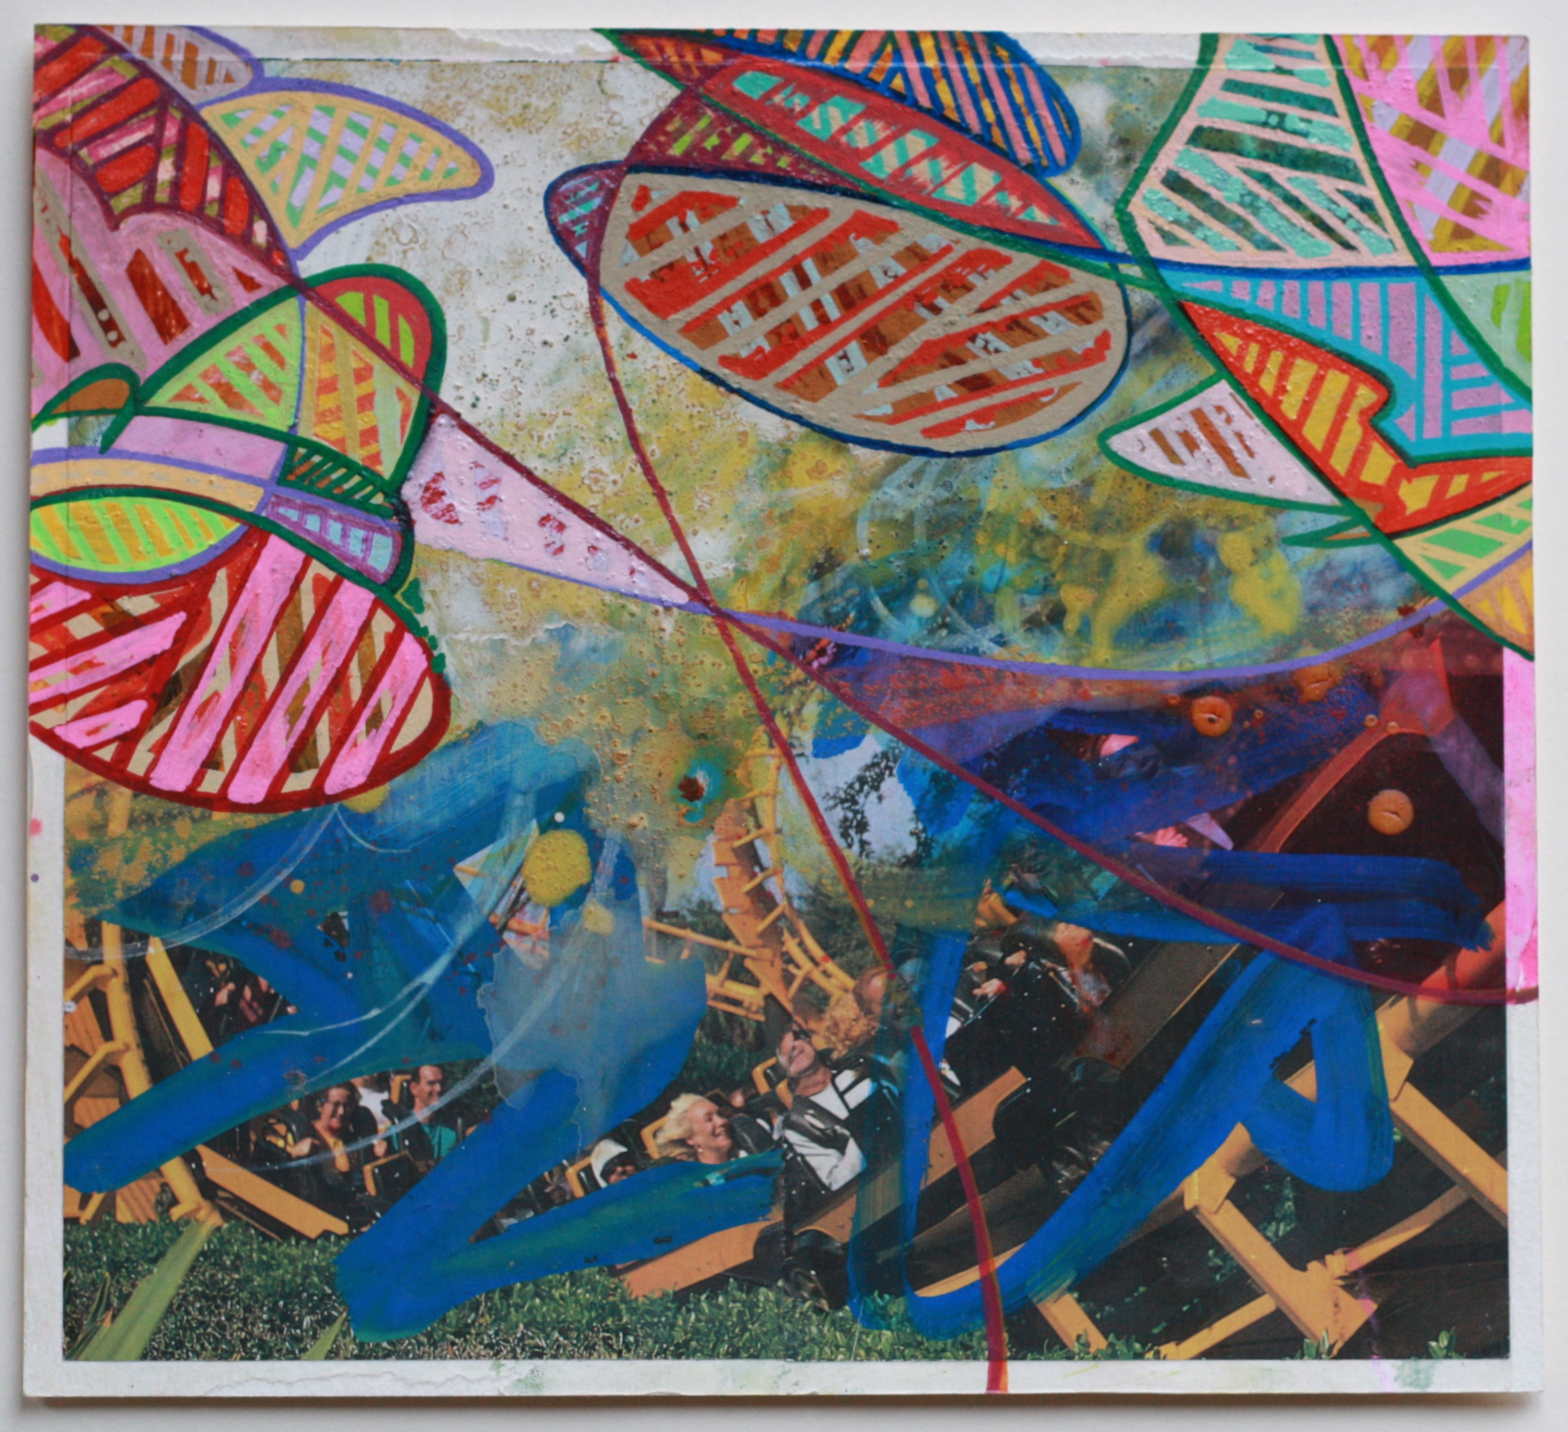 Pablo Power, "Compass Points/Forming Patterns/Florida Dreaming 9"